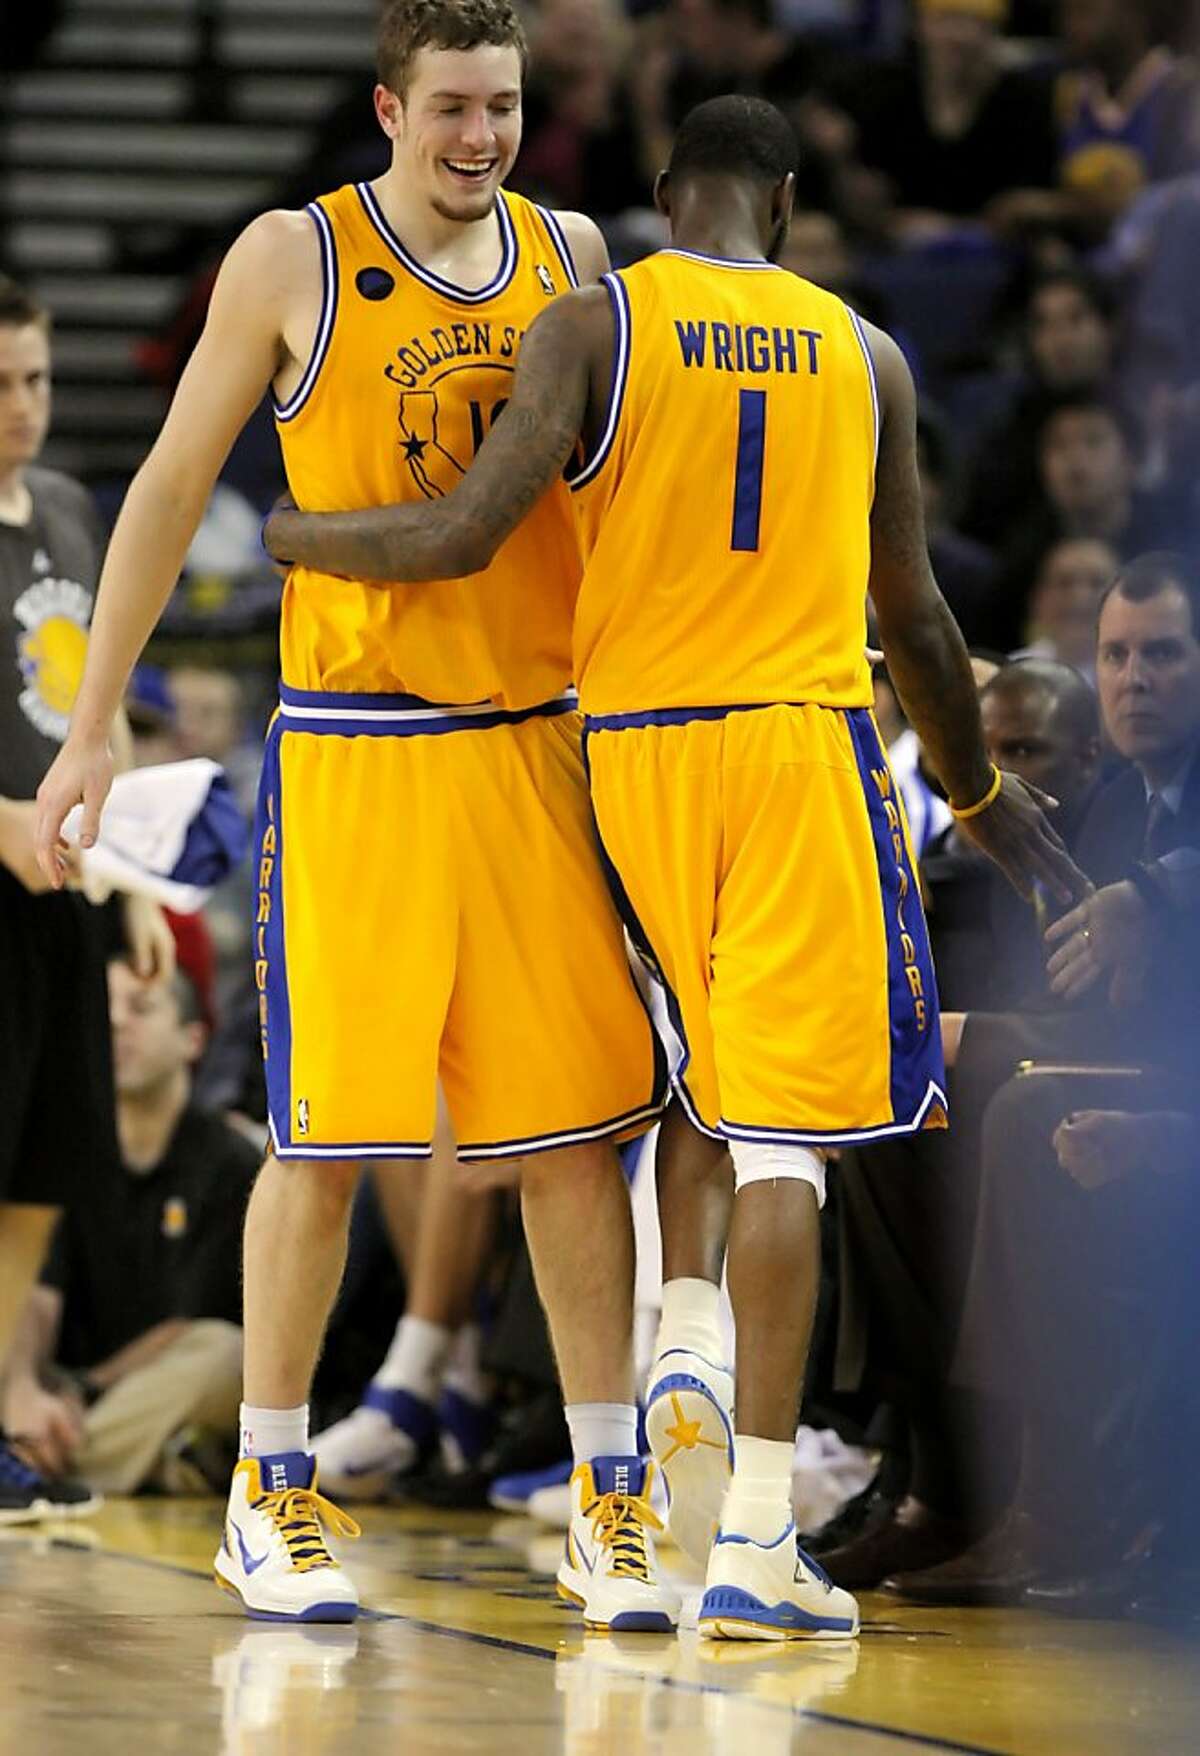 Dorrell Wright, right, gets a hug from teammate, David Lee after Wright came out of the game in the final minutes. The Golden State Warriors played the New Orleans Hornets at Oracle Arena in Oakland, Calif., on Tuesday, February 15, 2011.